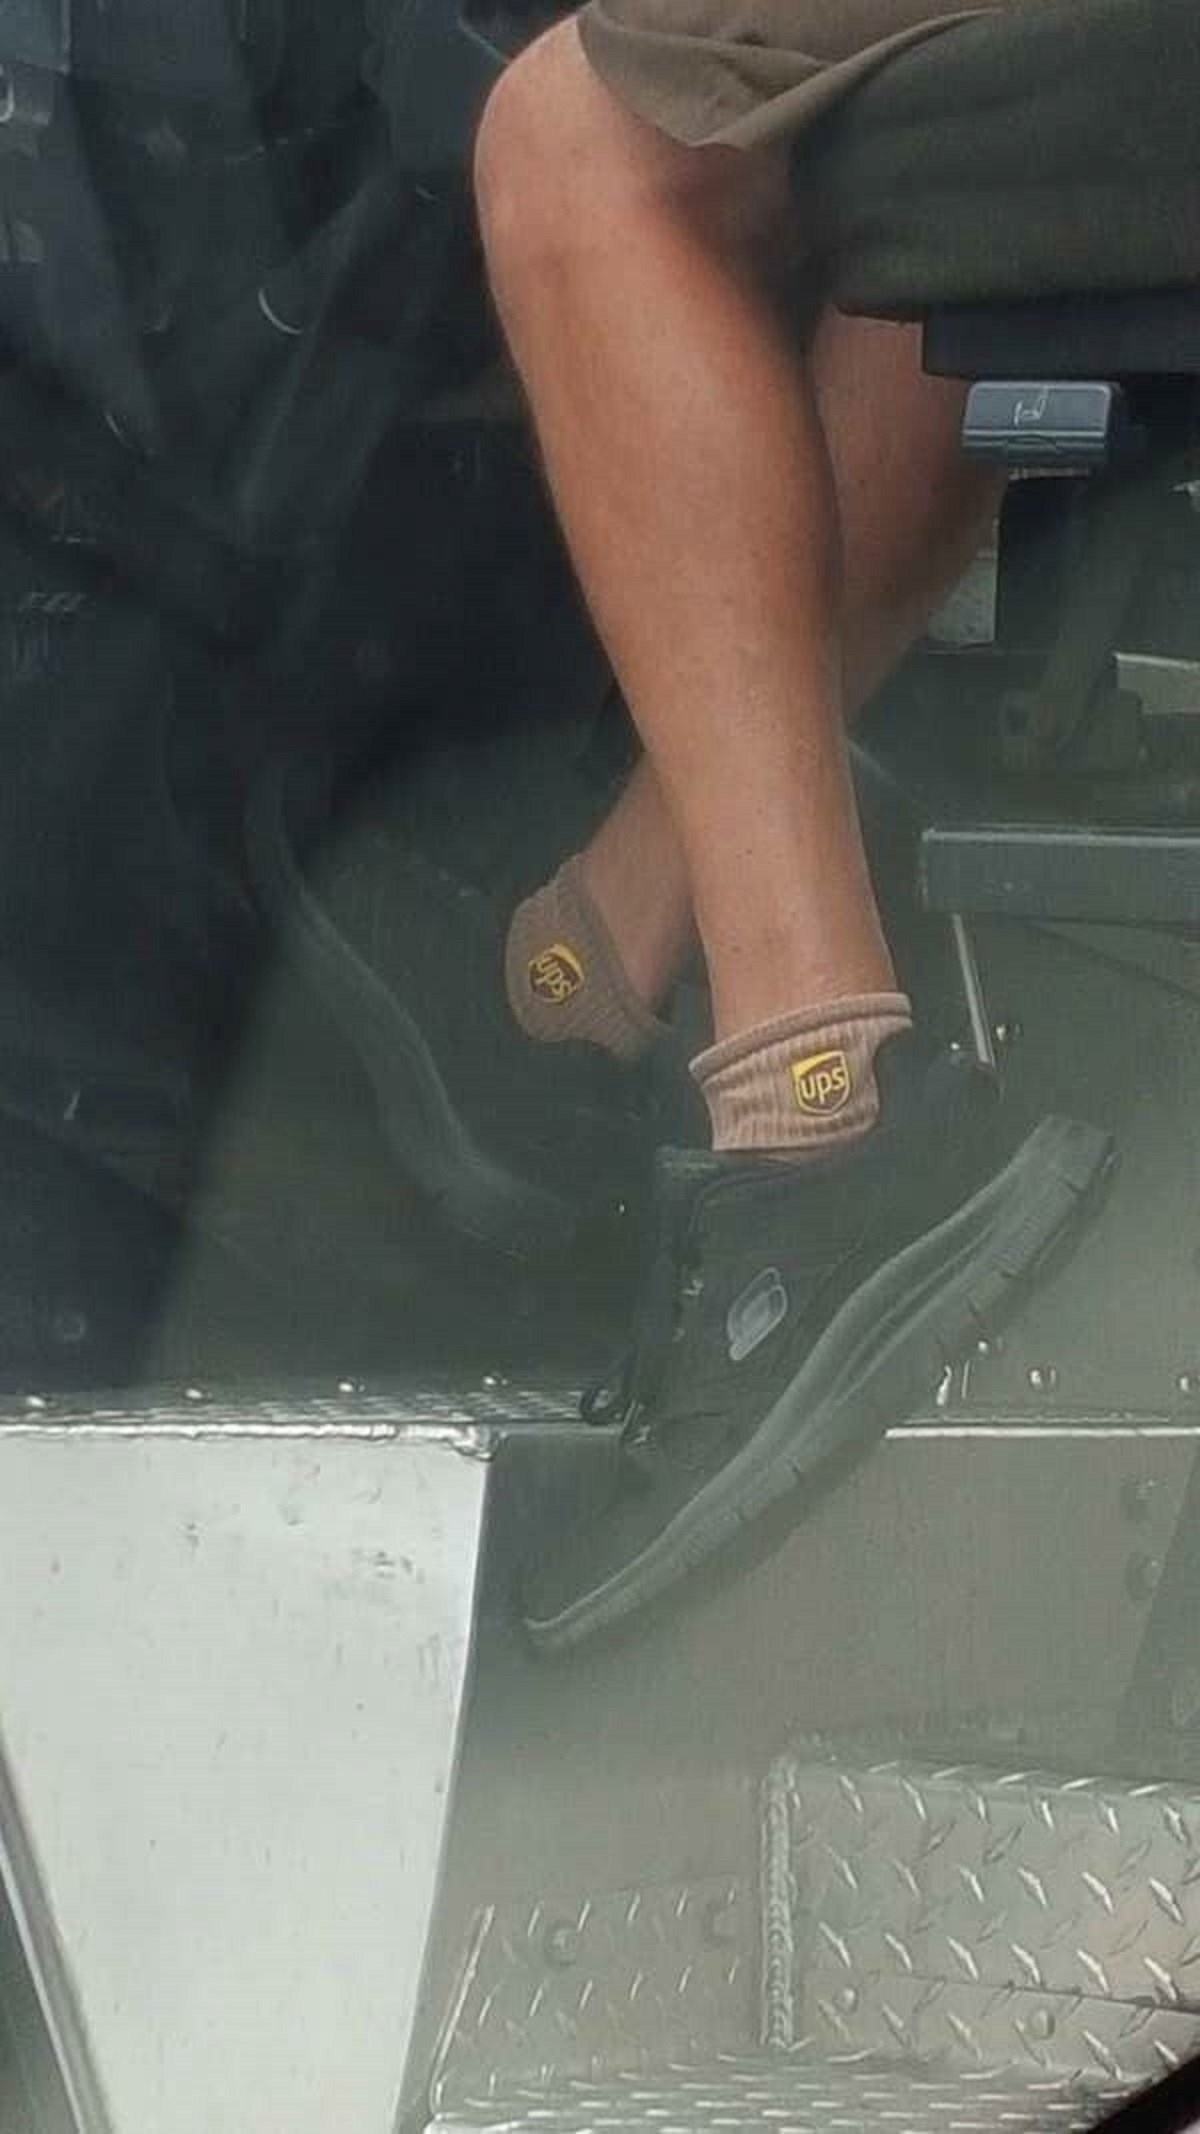 UPS drivers have special UPS socks as part of their uniform: